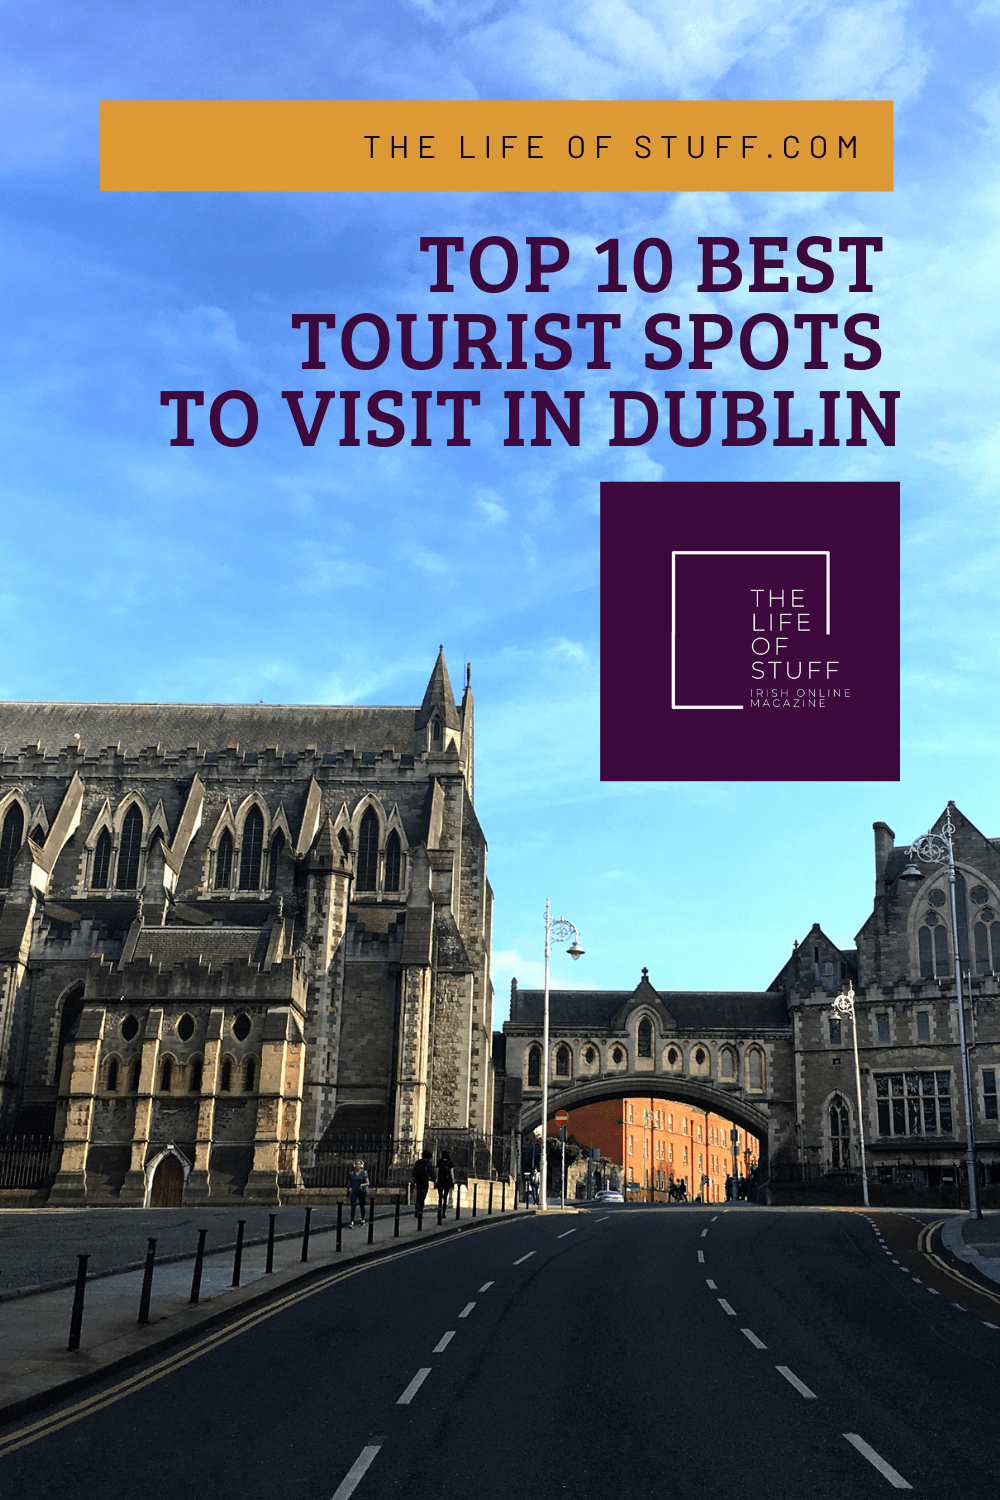 Top 10 Best Tourist Spots to Visit in Dublin on The Life of Stuff